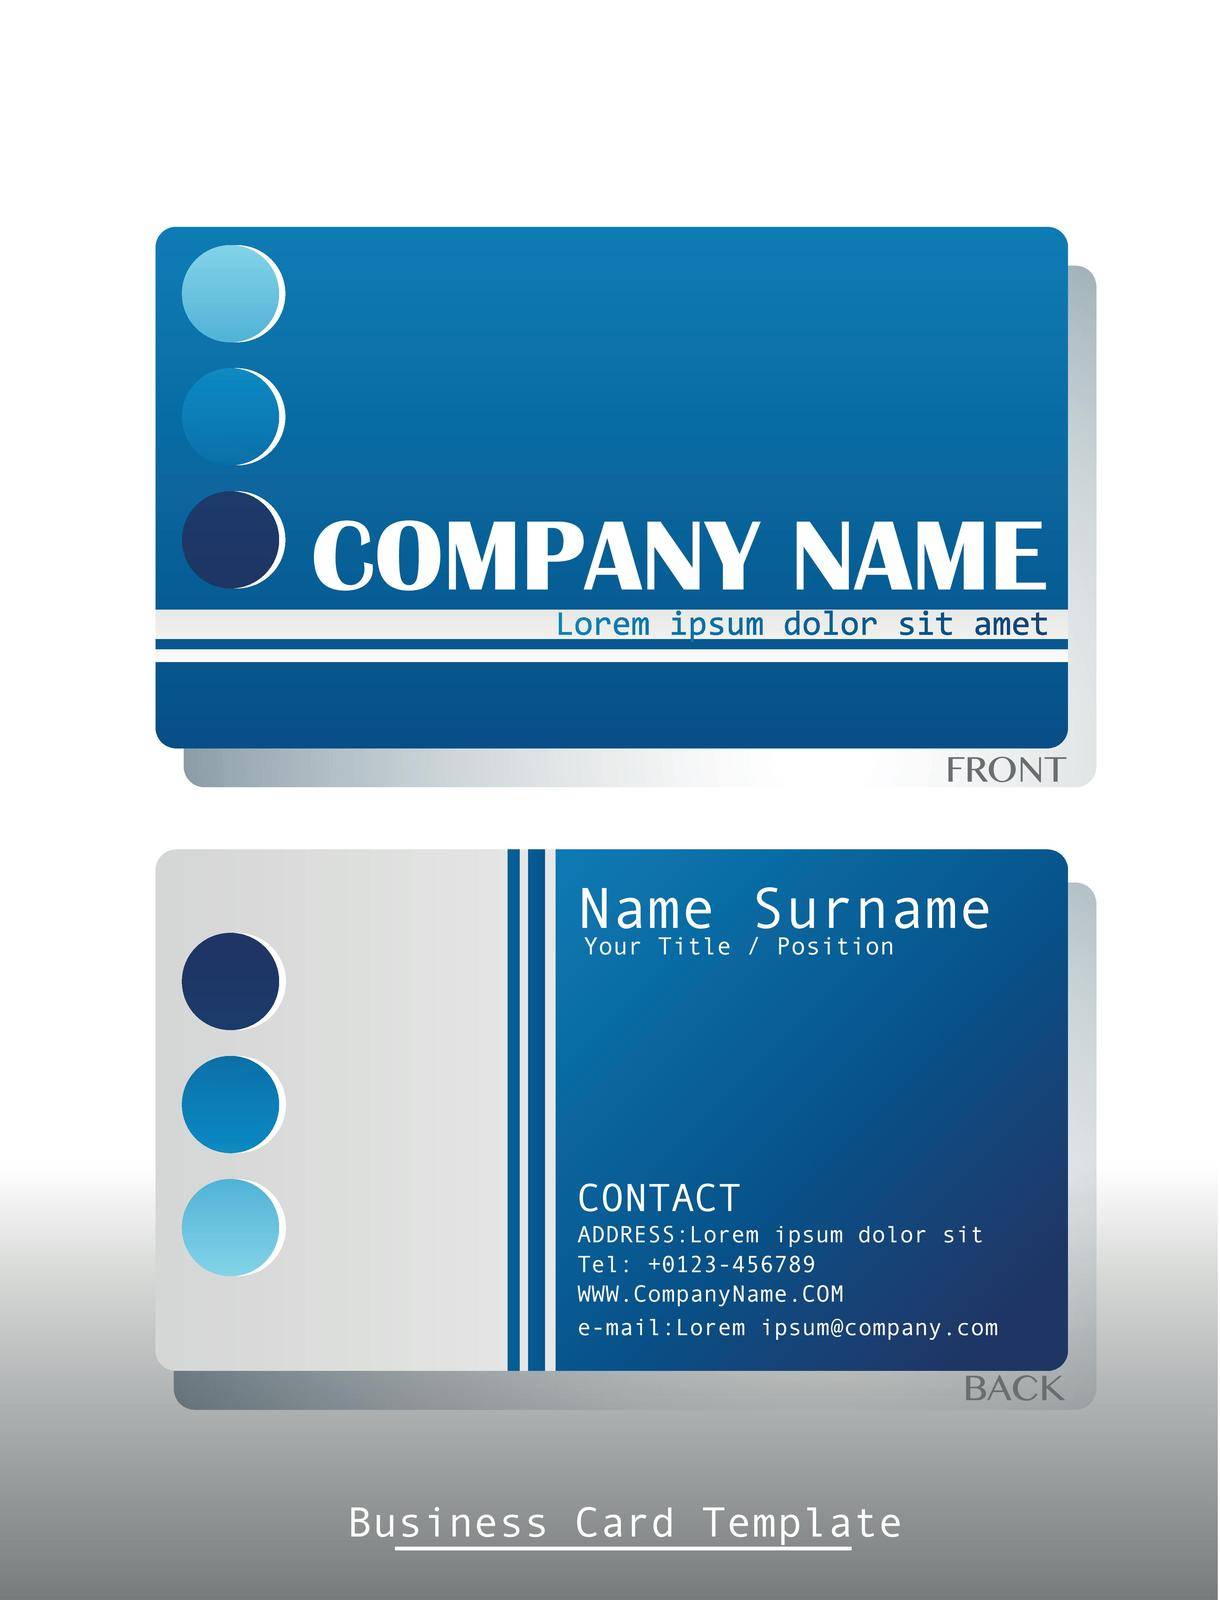 Illustration of a front and back view of a business card